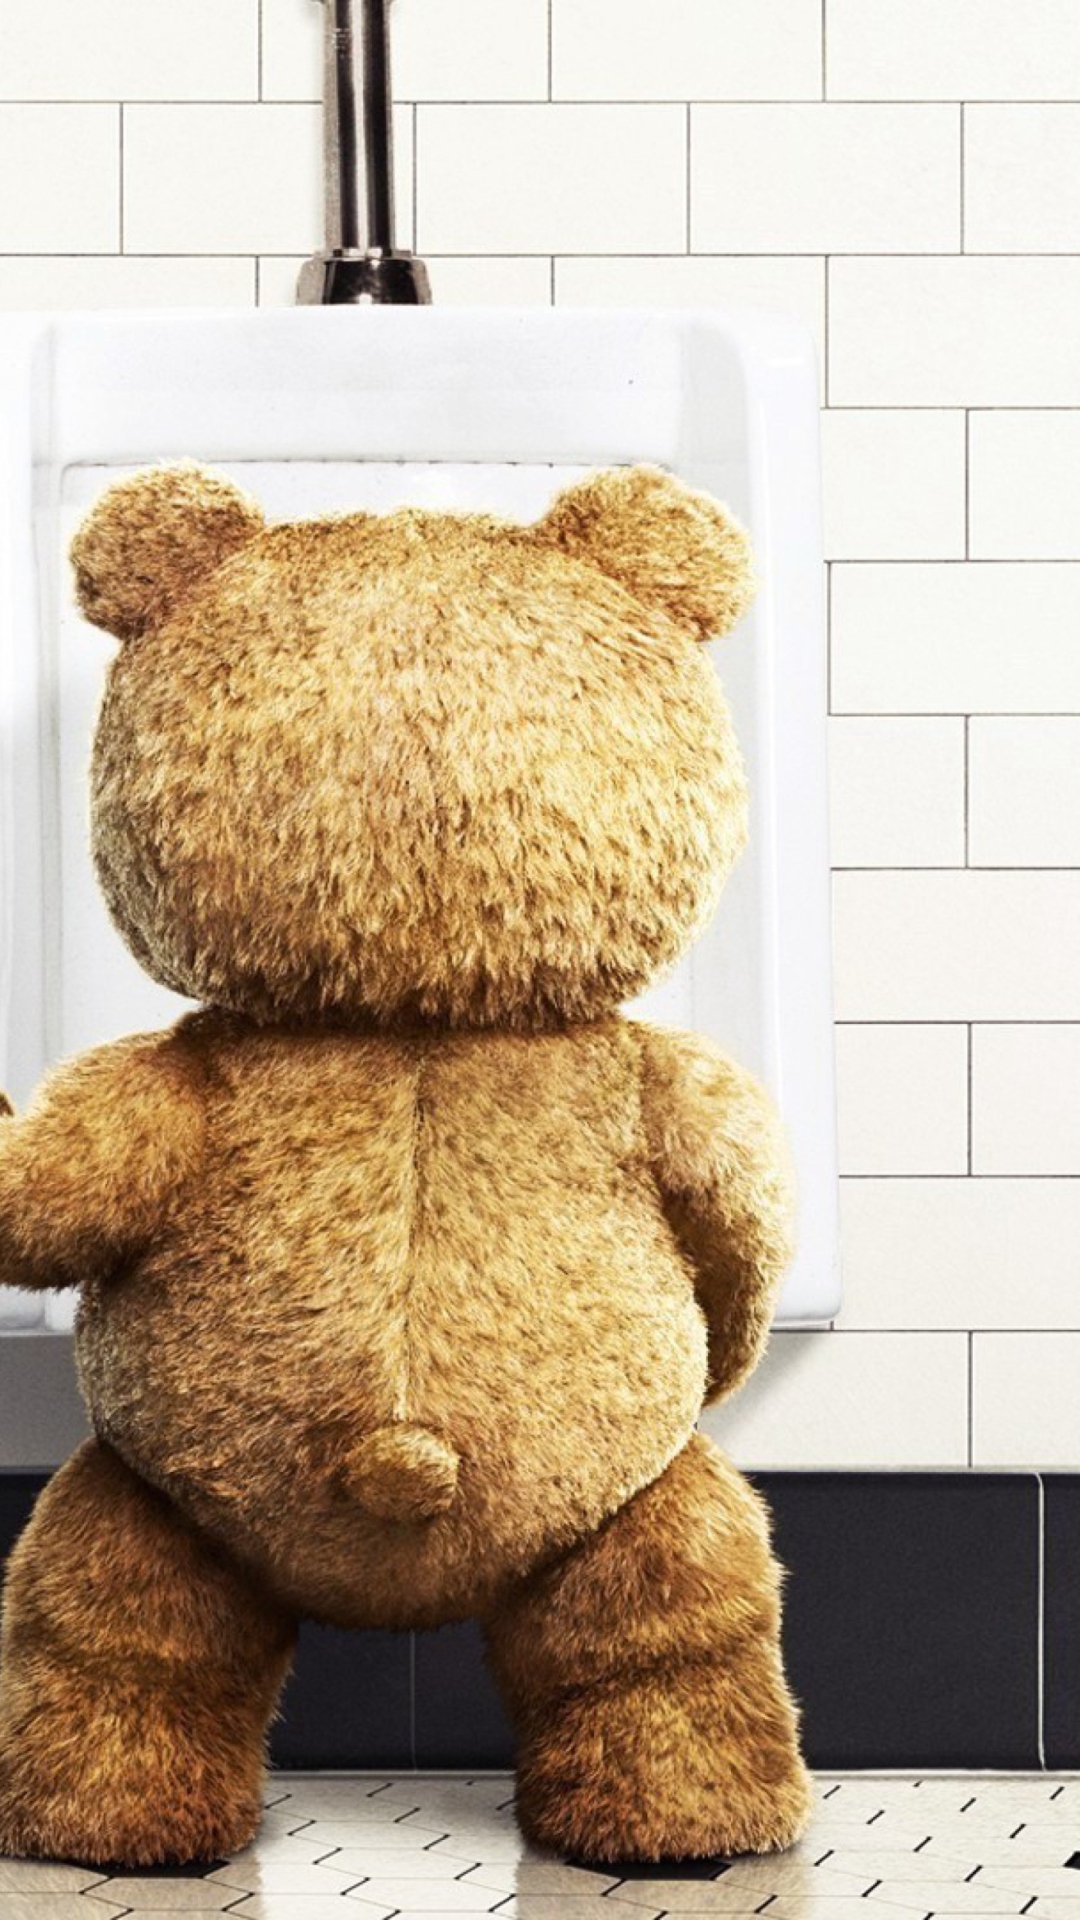 Ted Poster wallpaper 1080x1920